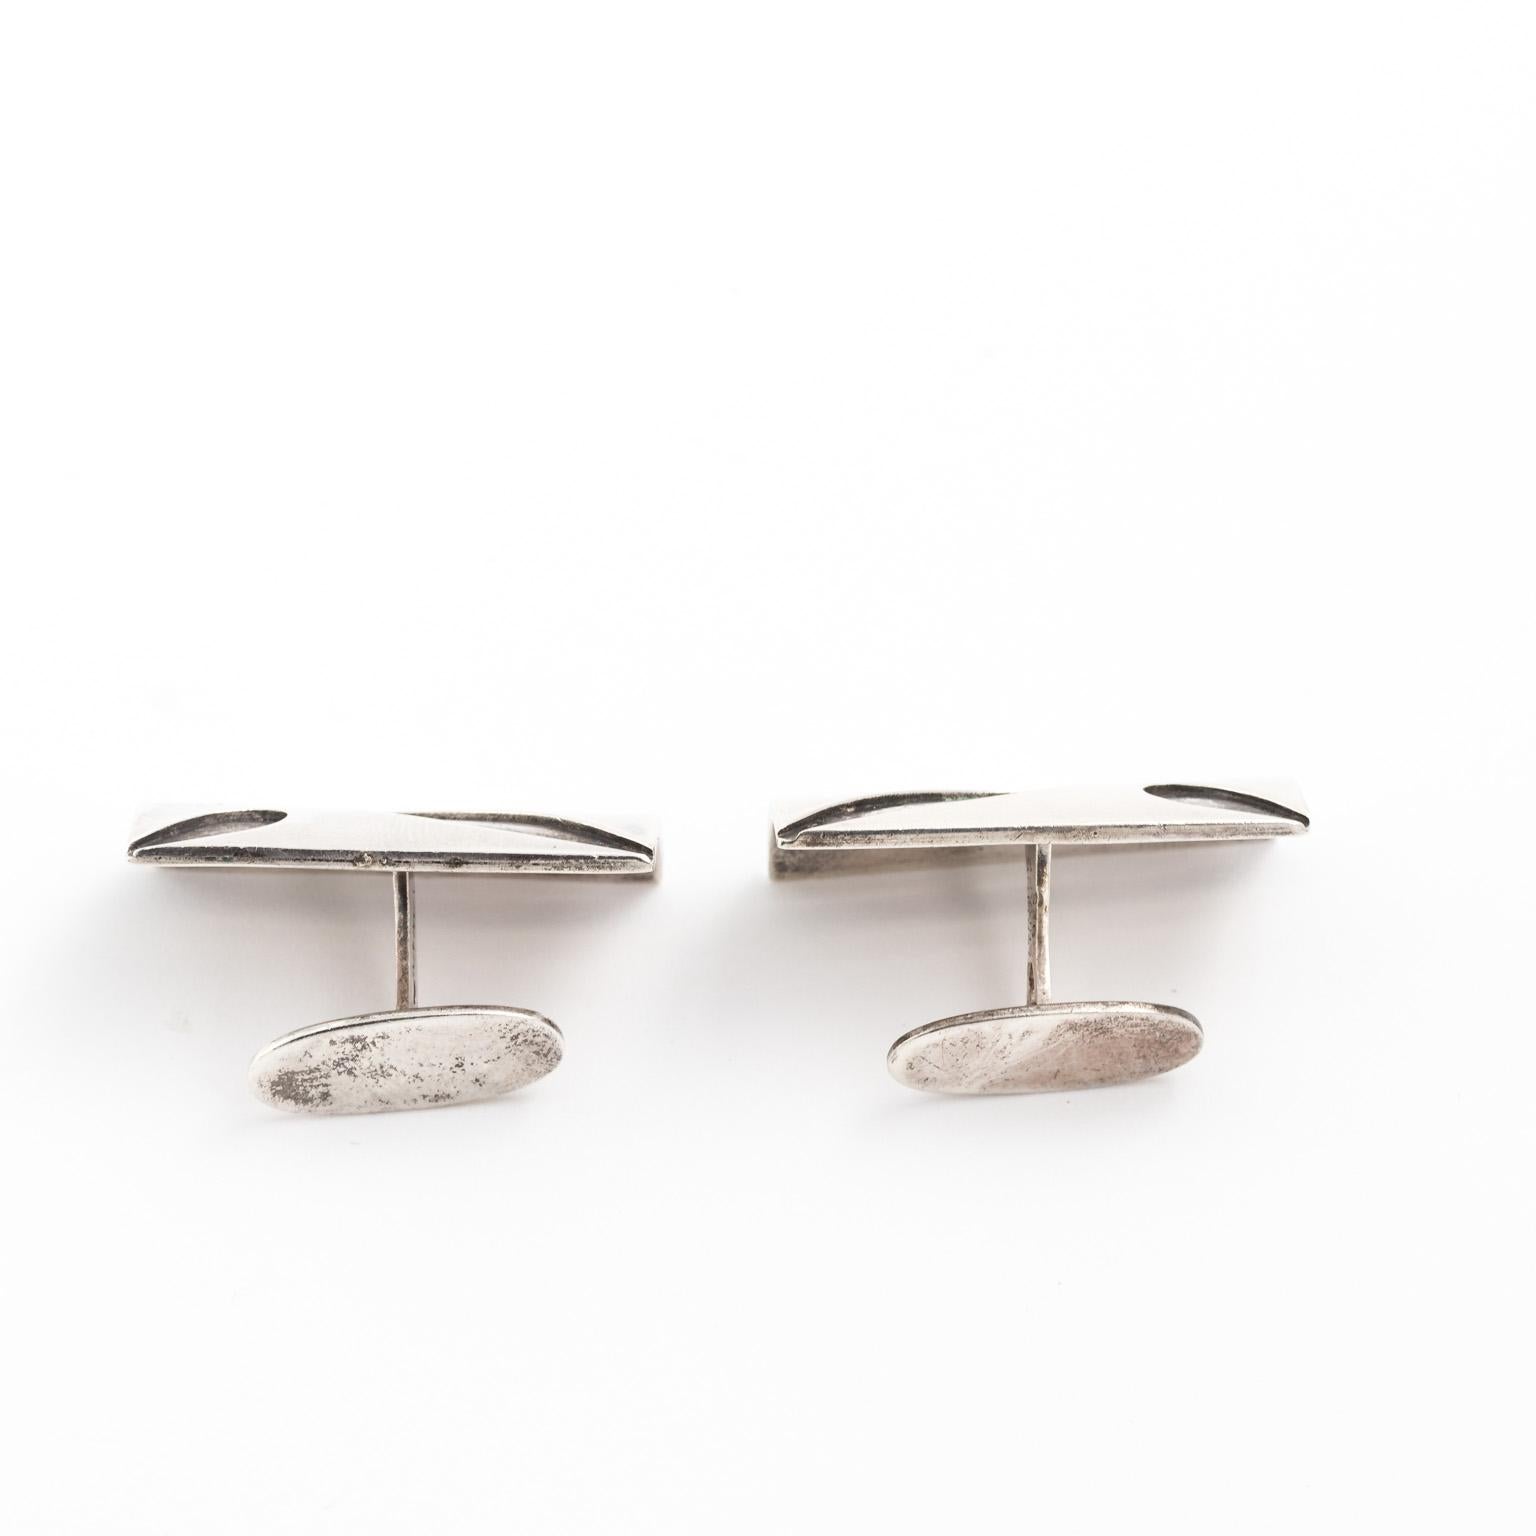 Circa 1950s handmade Sterling Silver cuff links from Denmark with cut abstract designs on the rectangular front. 